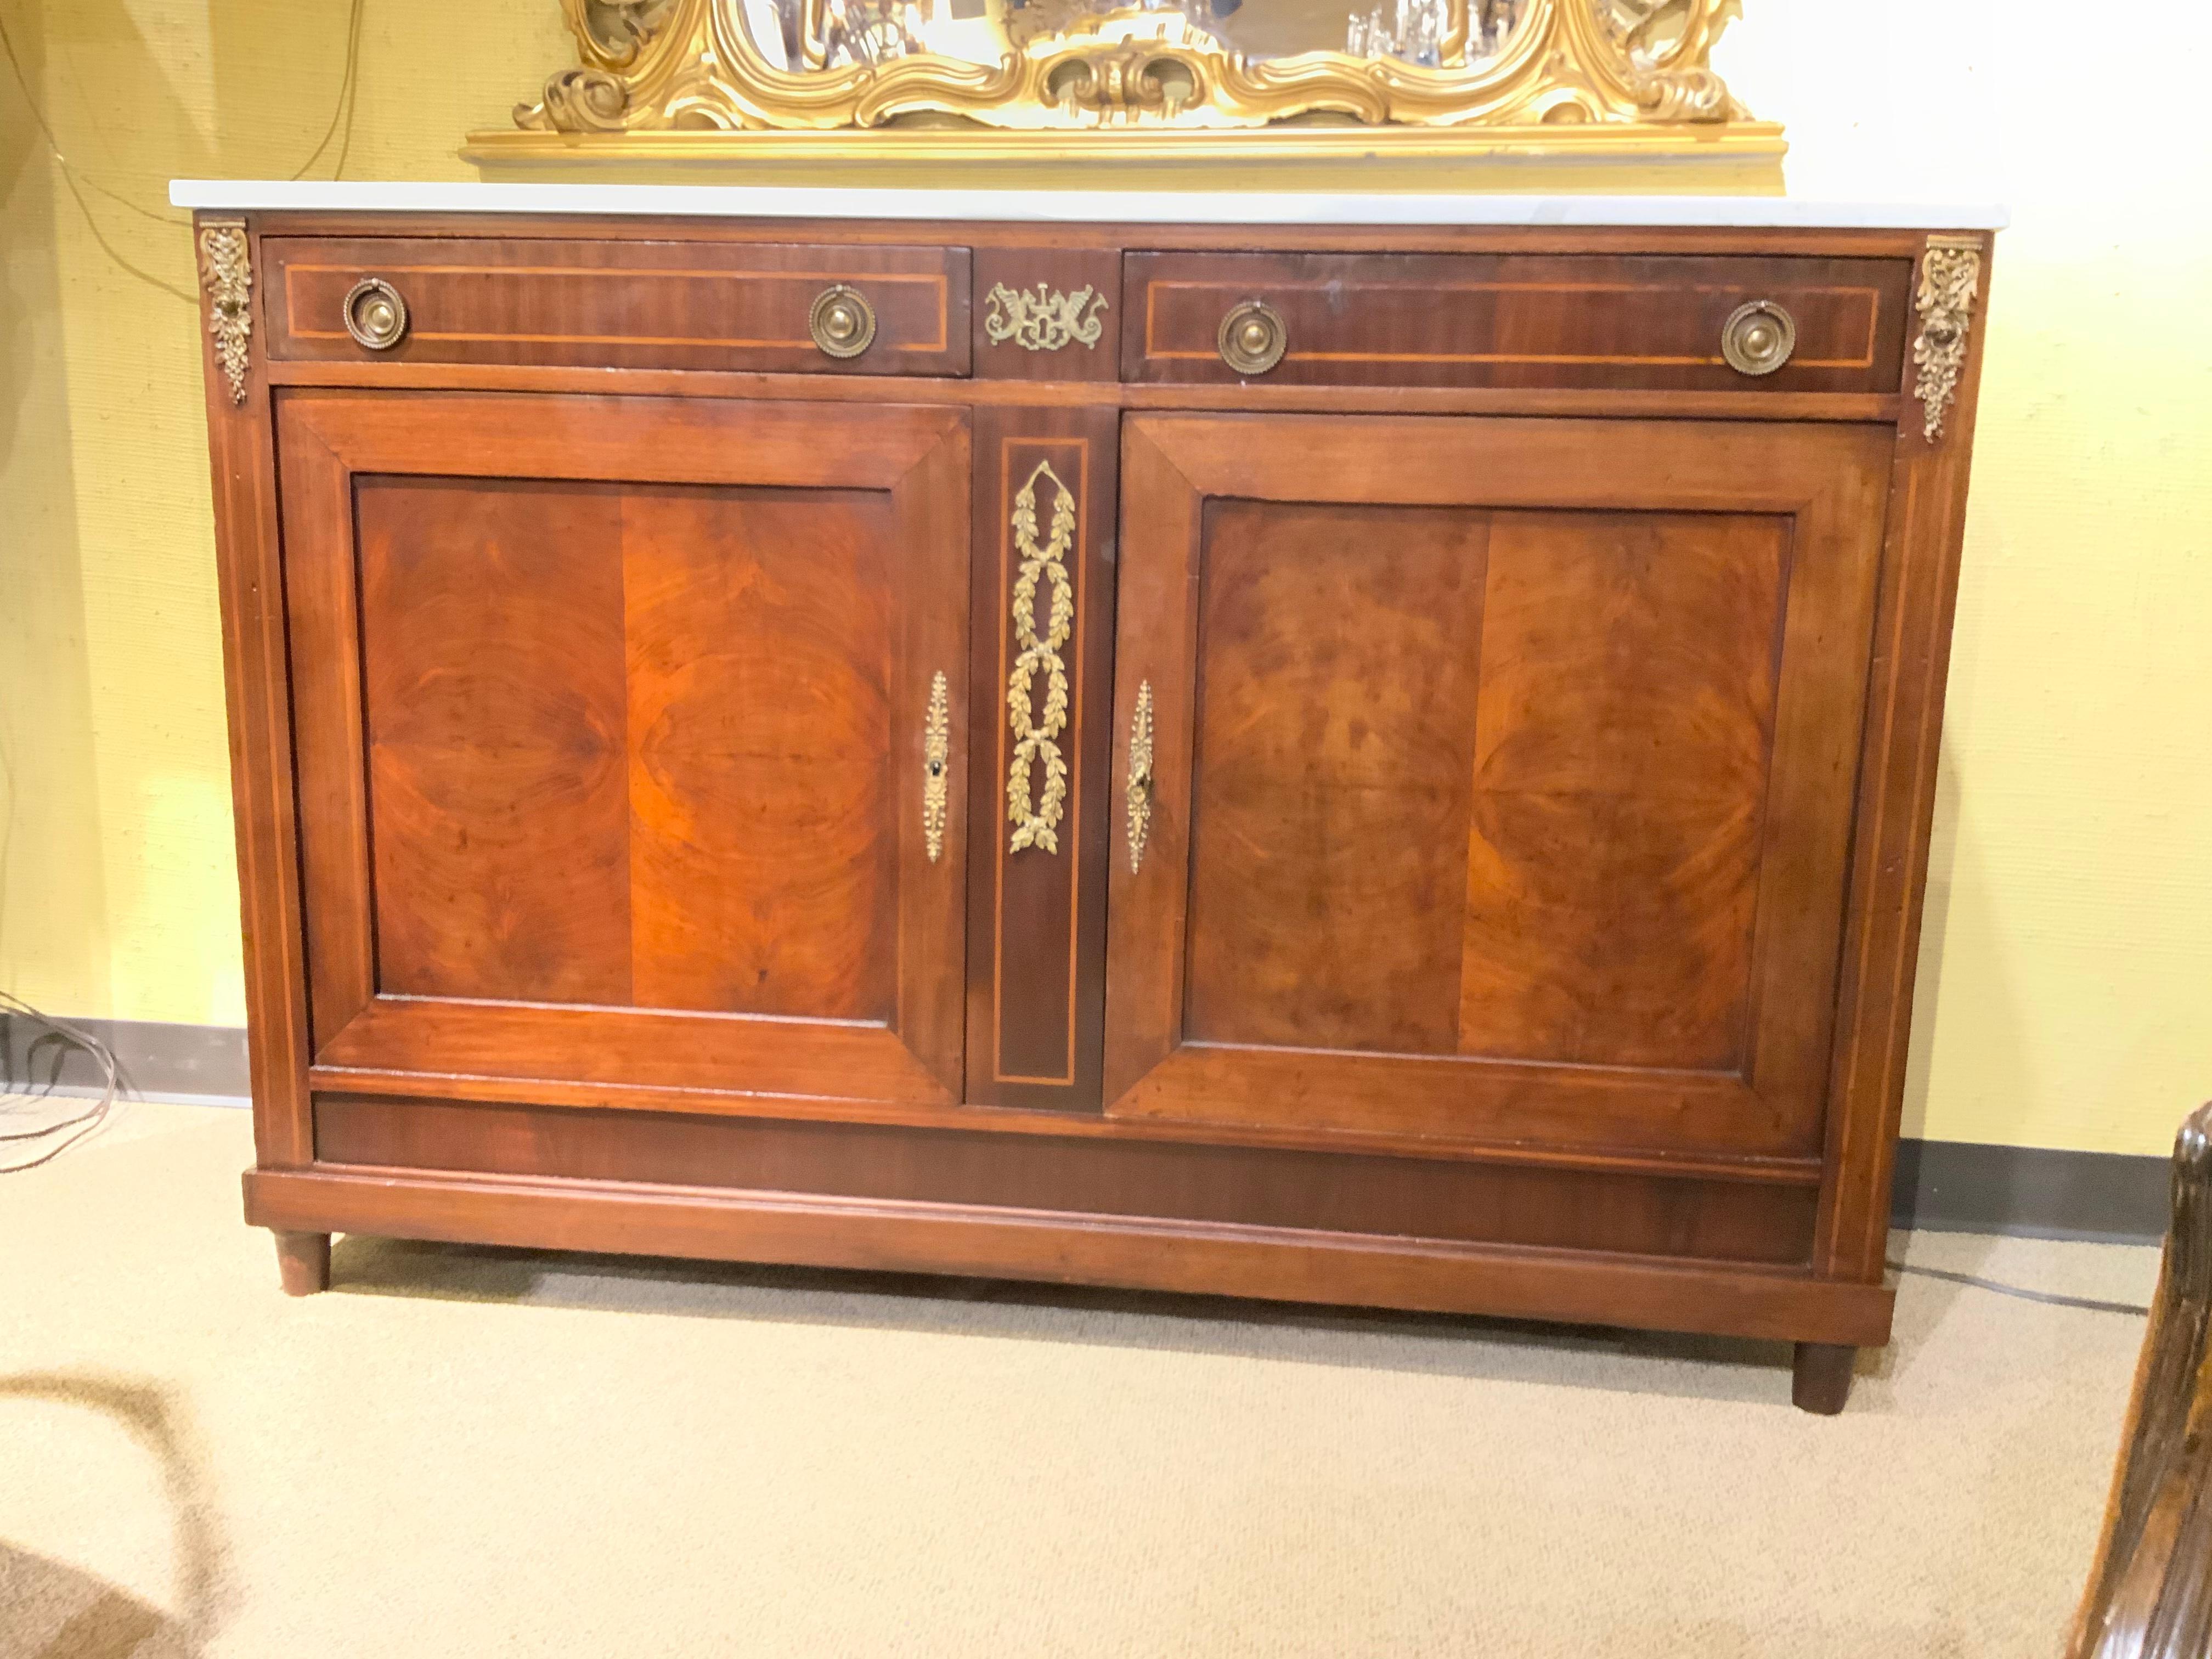 This piece is made of beautiful crotch mahogany with a deep patina.
The bronze hardware is original and in great condition. The marble has
No chips or repairs. The drawers move easily for sliding open. The doors
Open wide for good storage and it